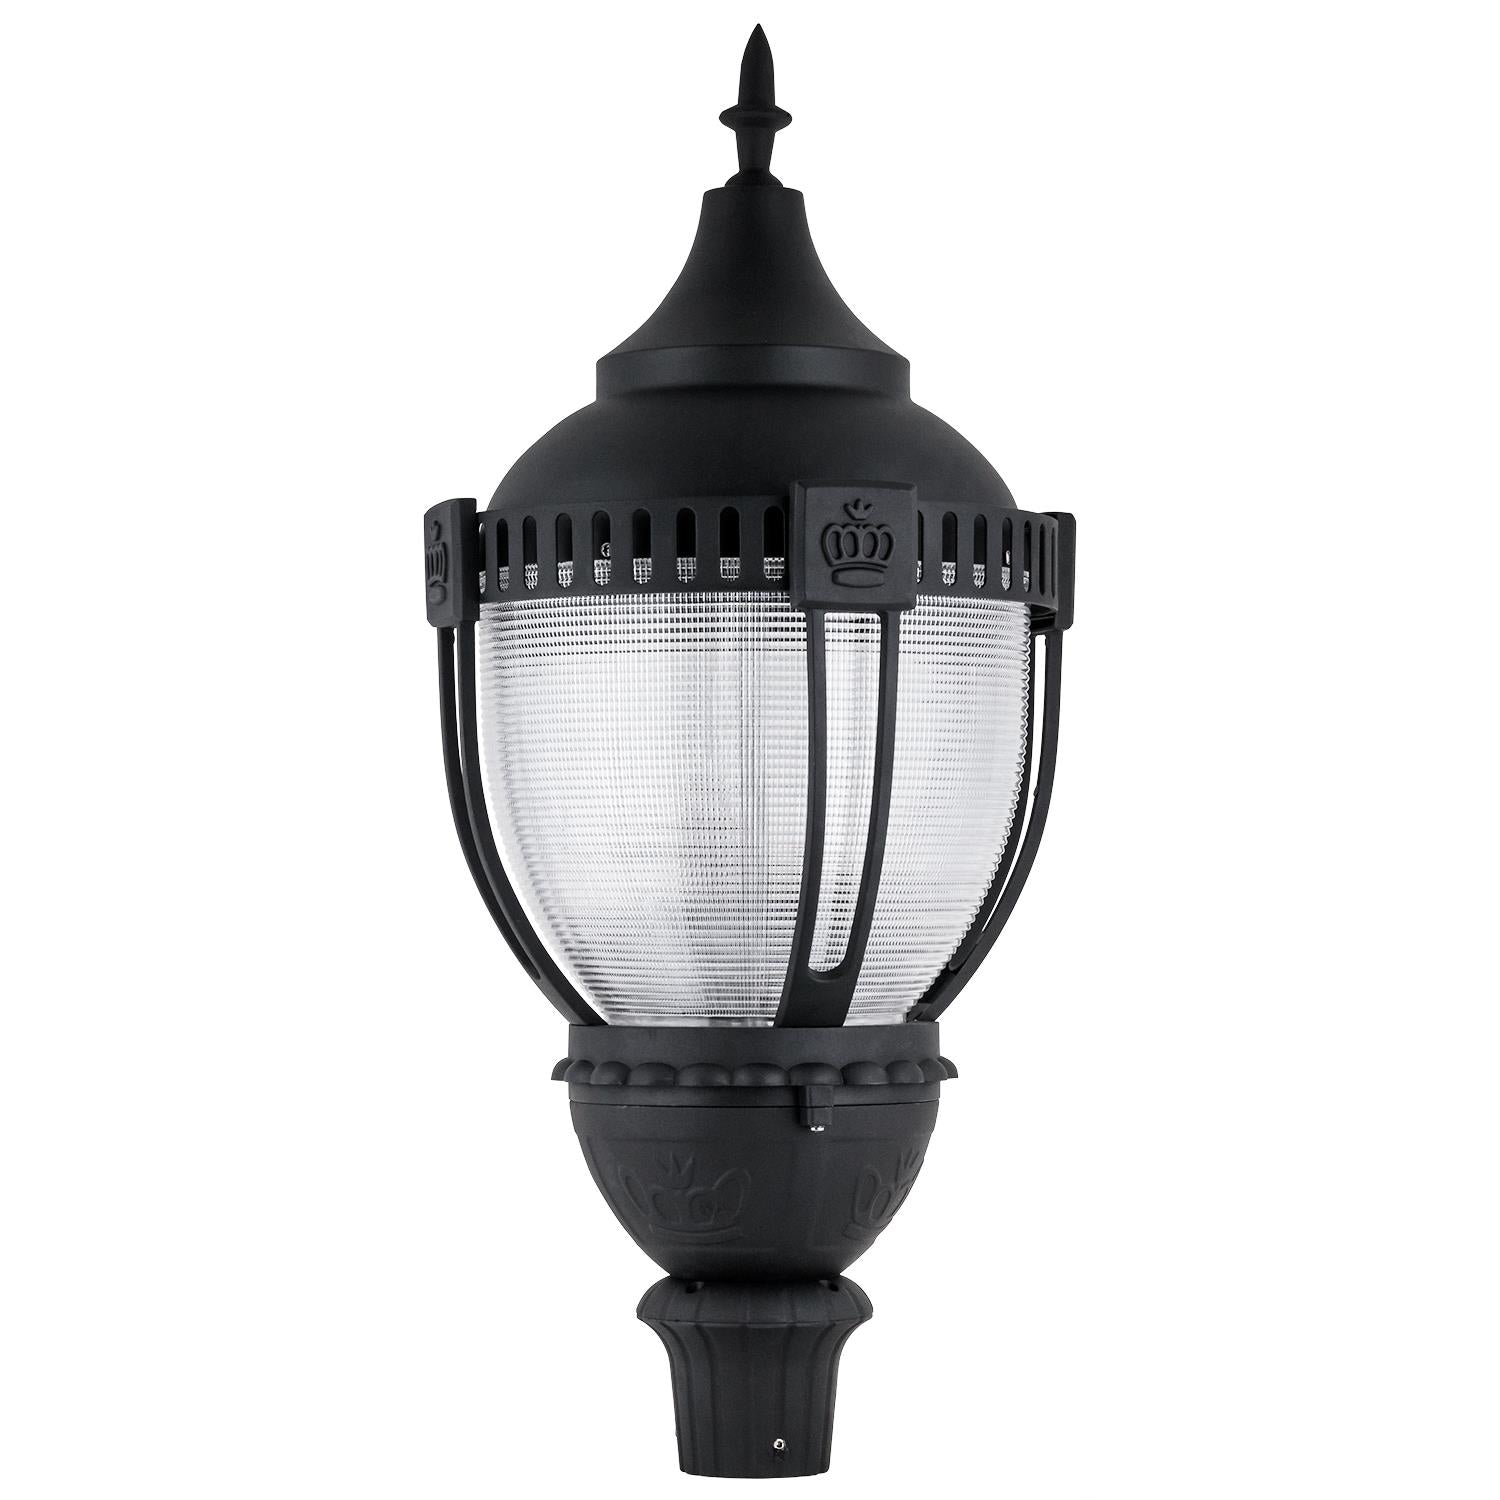 Commercial Outdoor Decorative Acorn LED Pole-Top Fixture - DLC Listed - Dimmable - 120-277V - 5000K - Frosted Black Finish